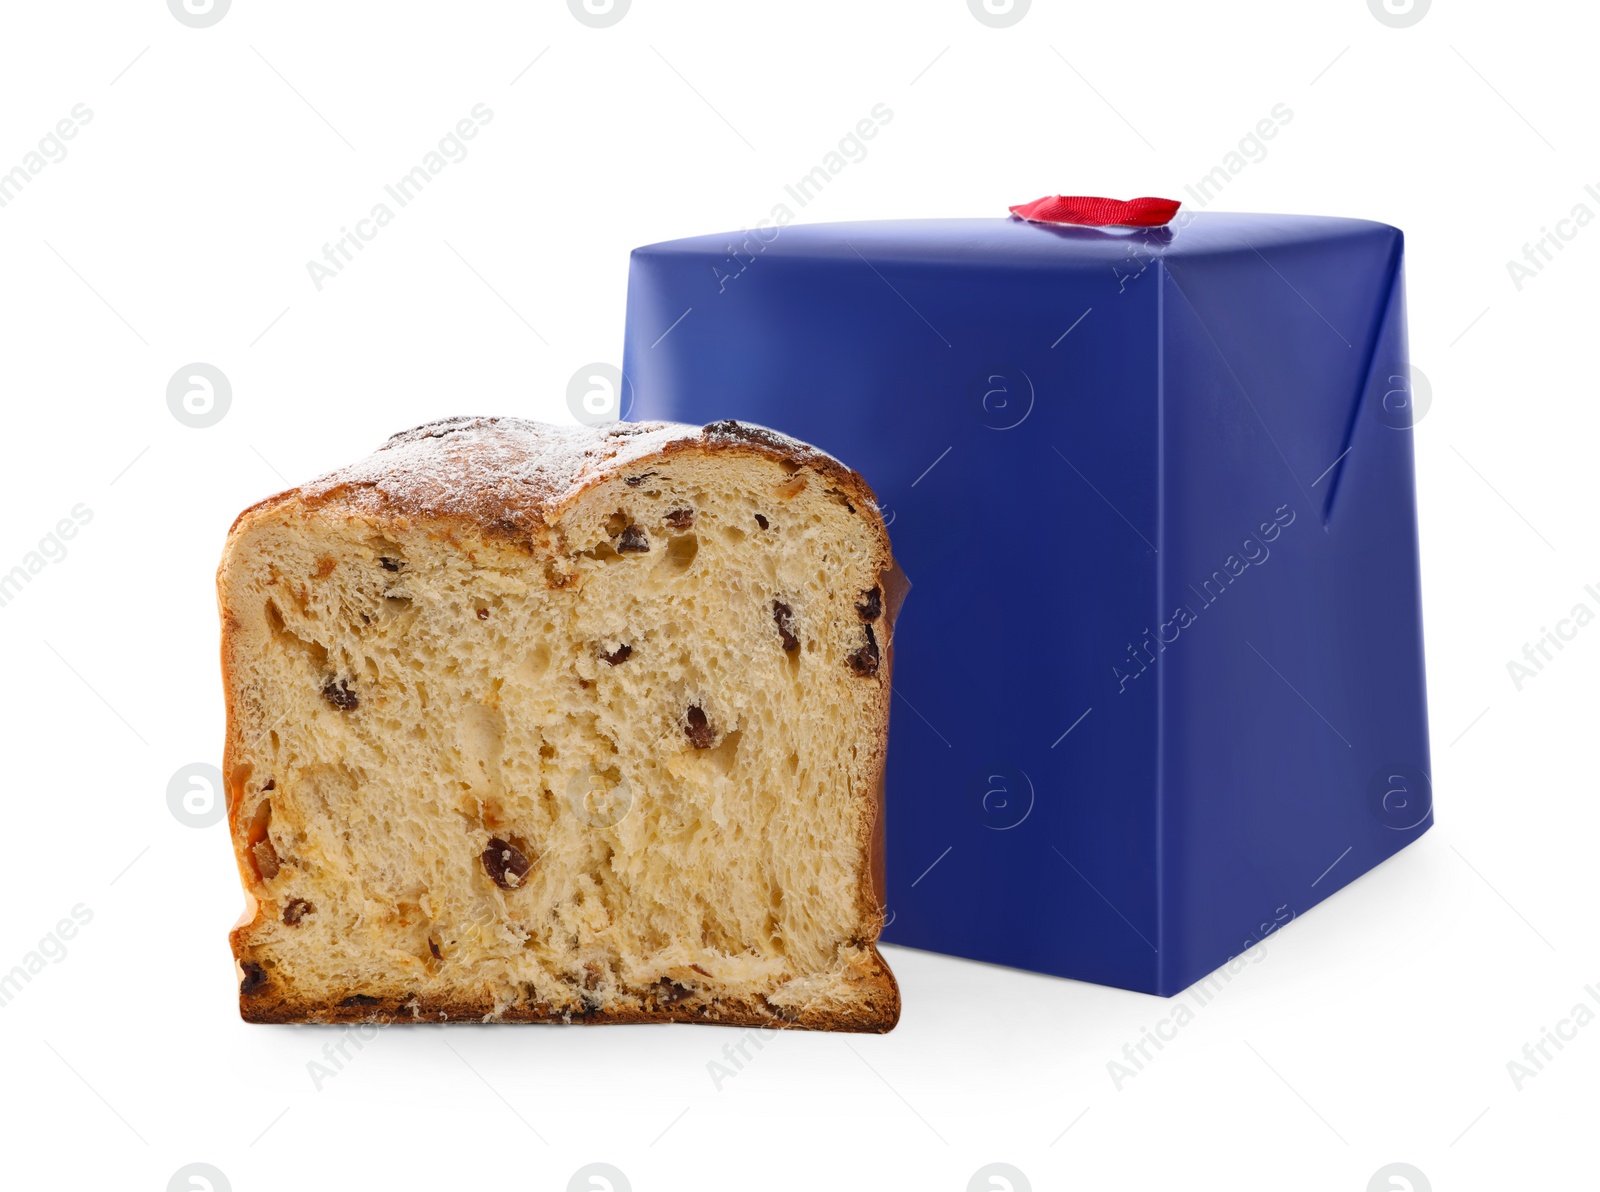 Photo of Half of delicious Panettone cake with powdered sugar and box on white background. Traditional Italian pastry